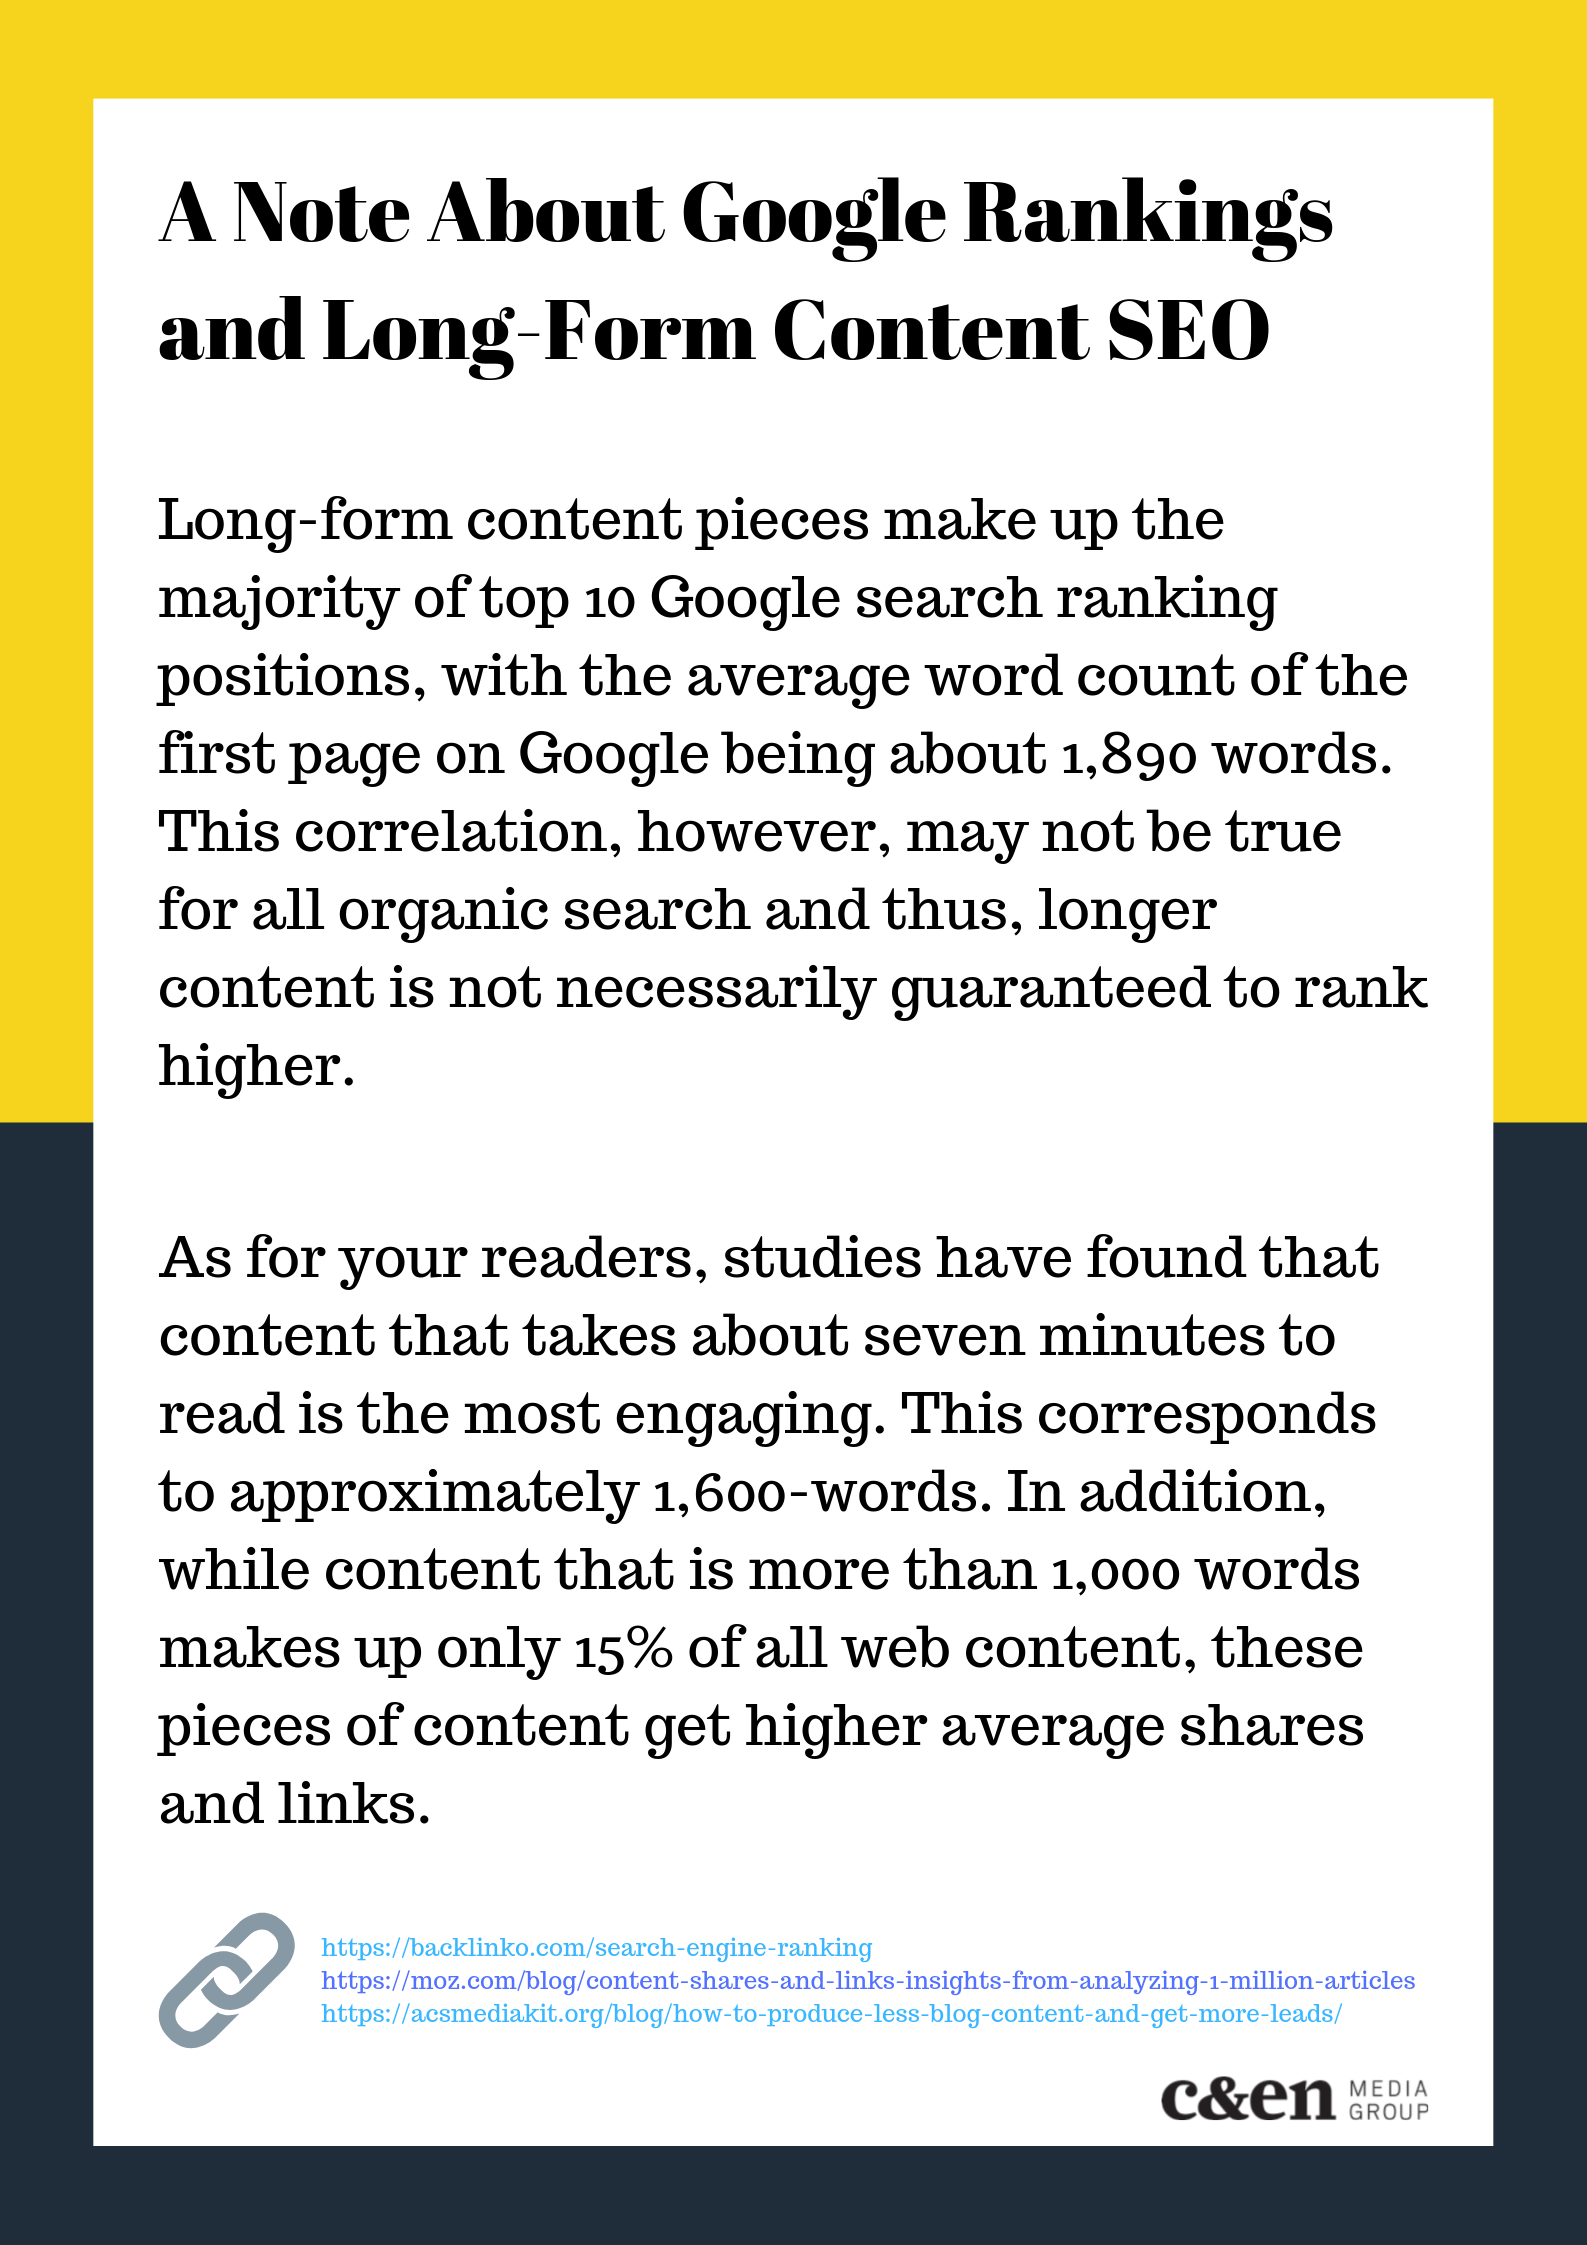 Should You Use Short- or Long-Form Content in Your Marketing